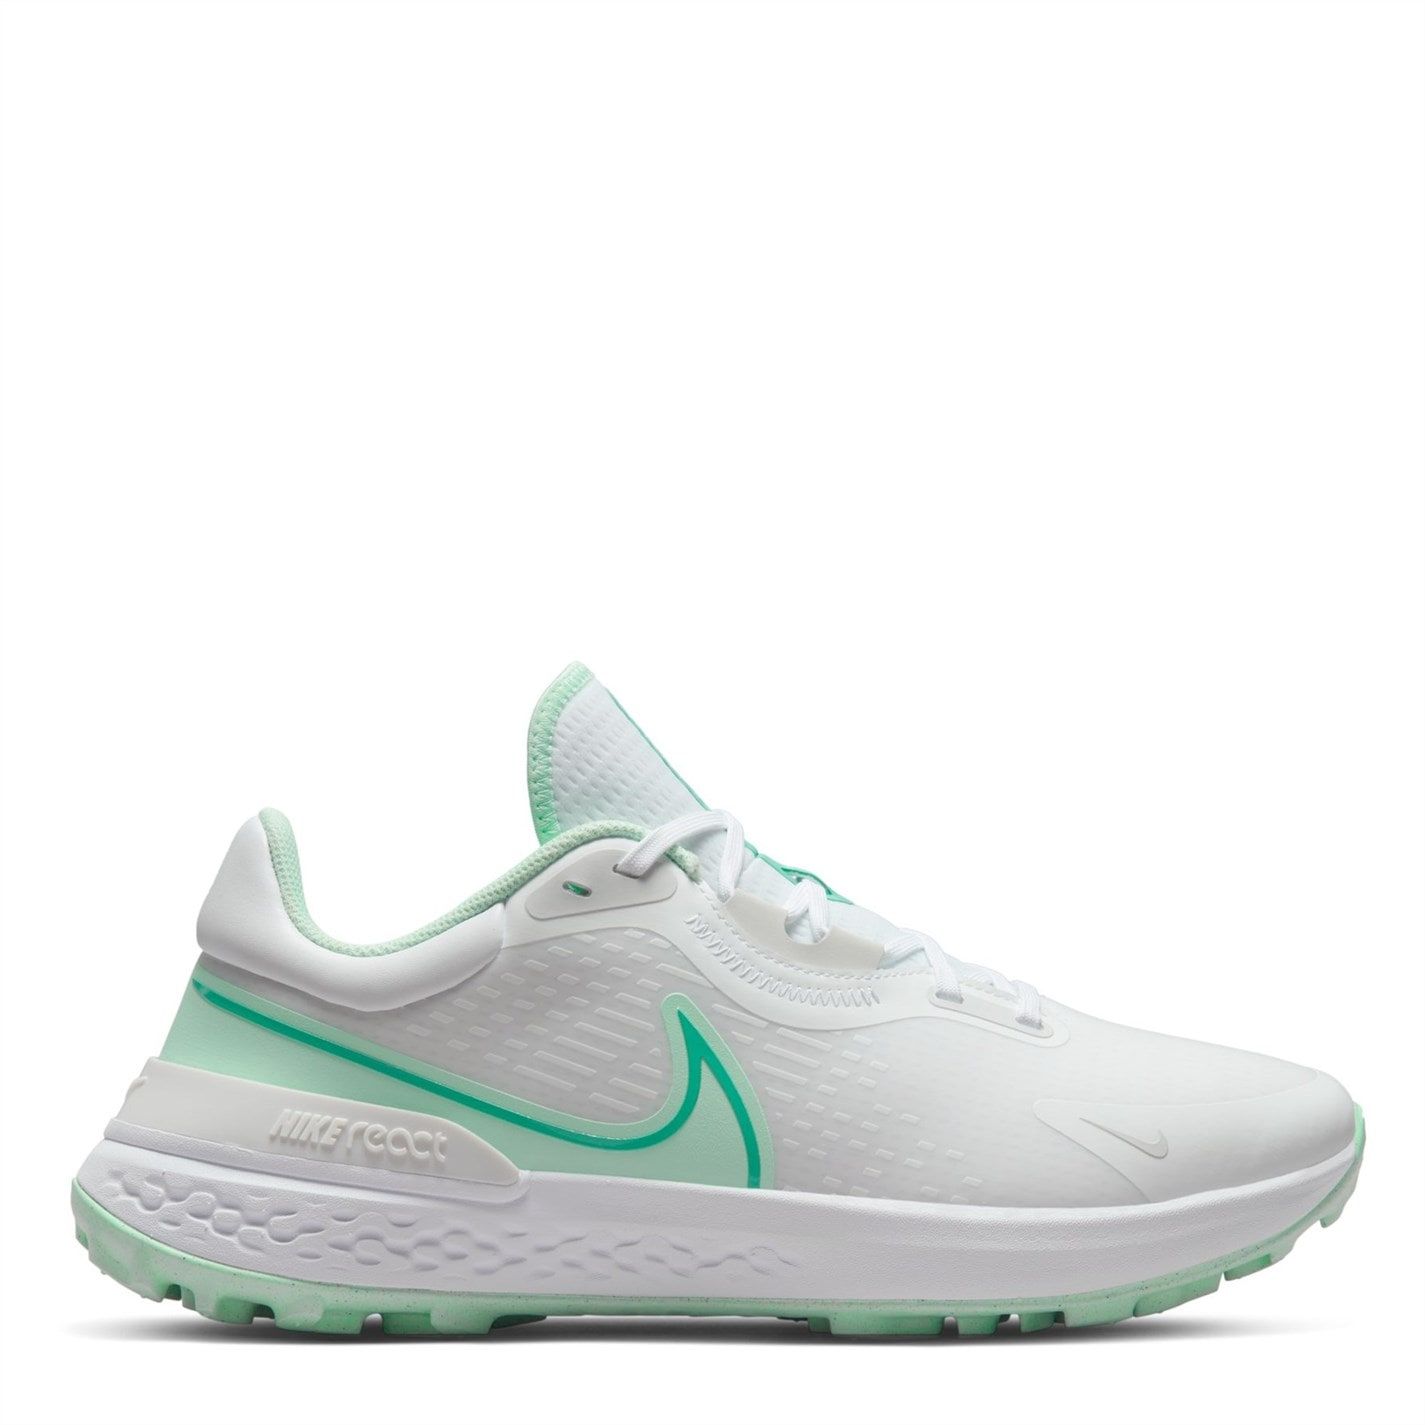 Nike Mens React Infinity Pro 2 Golf Shoes in White